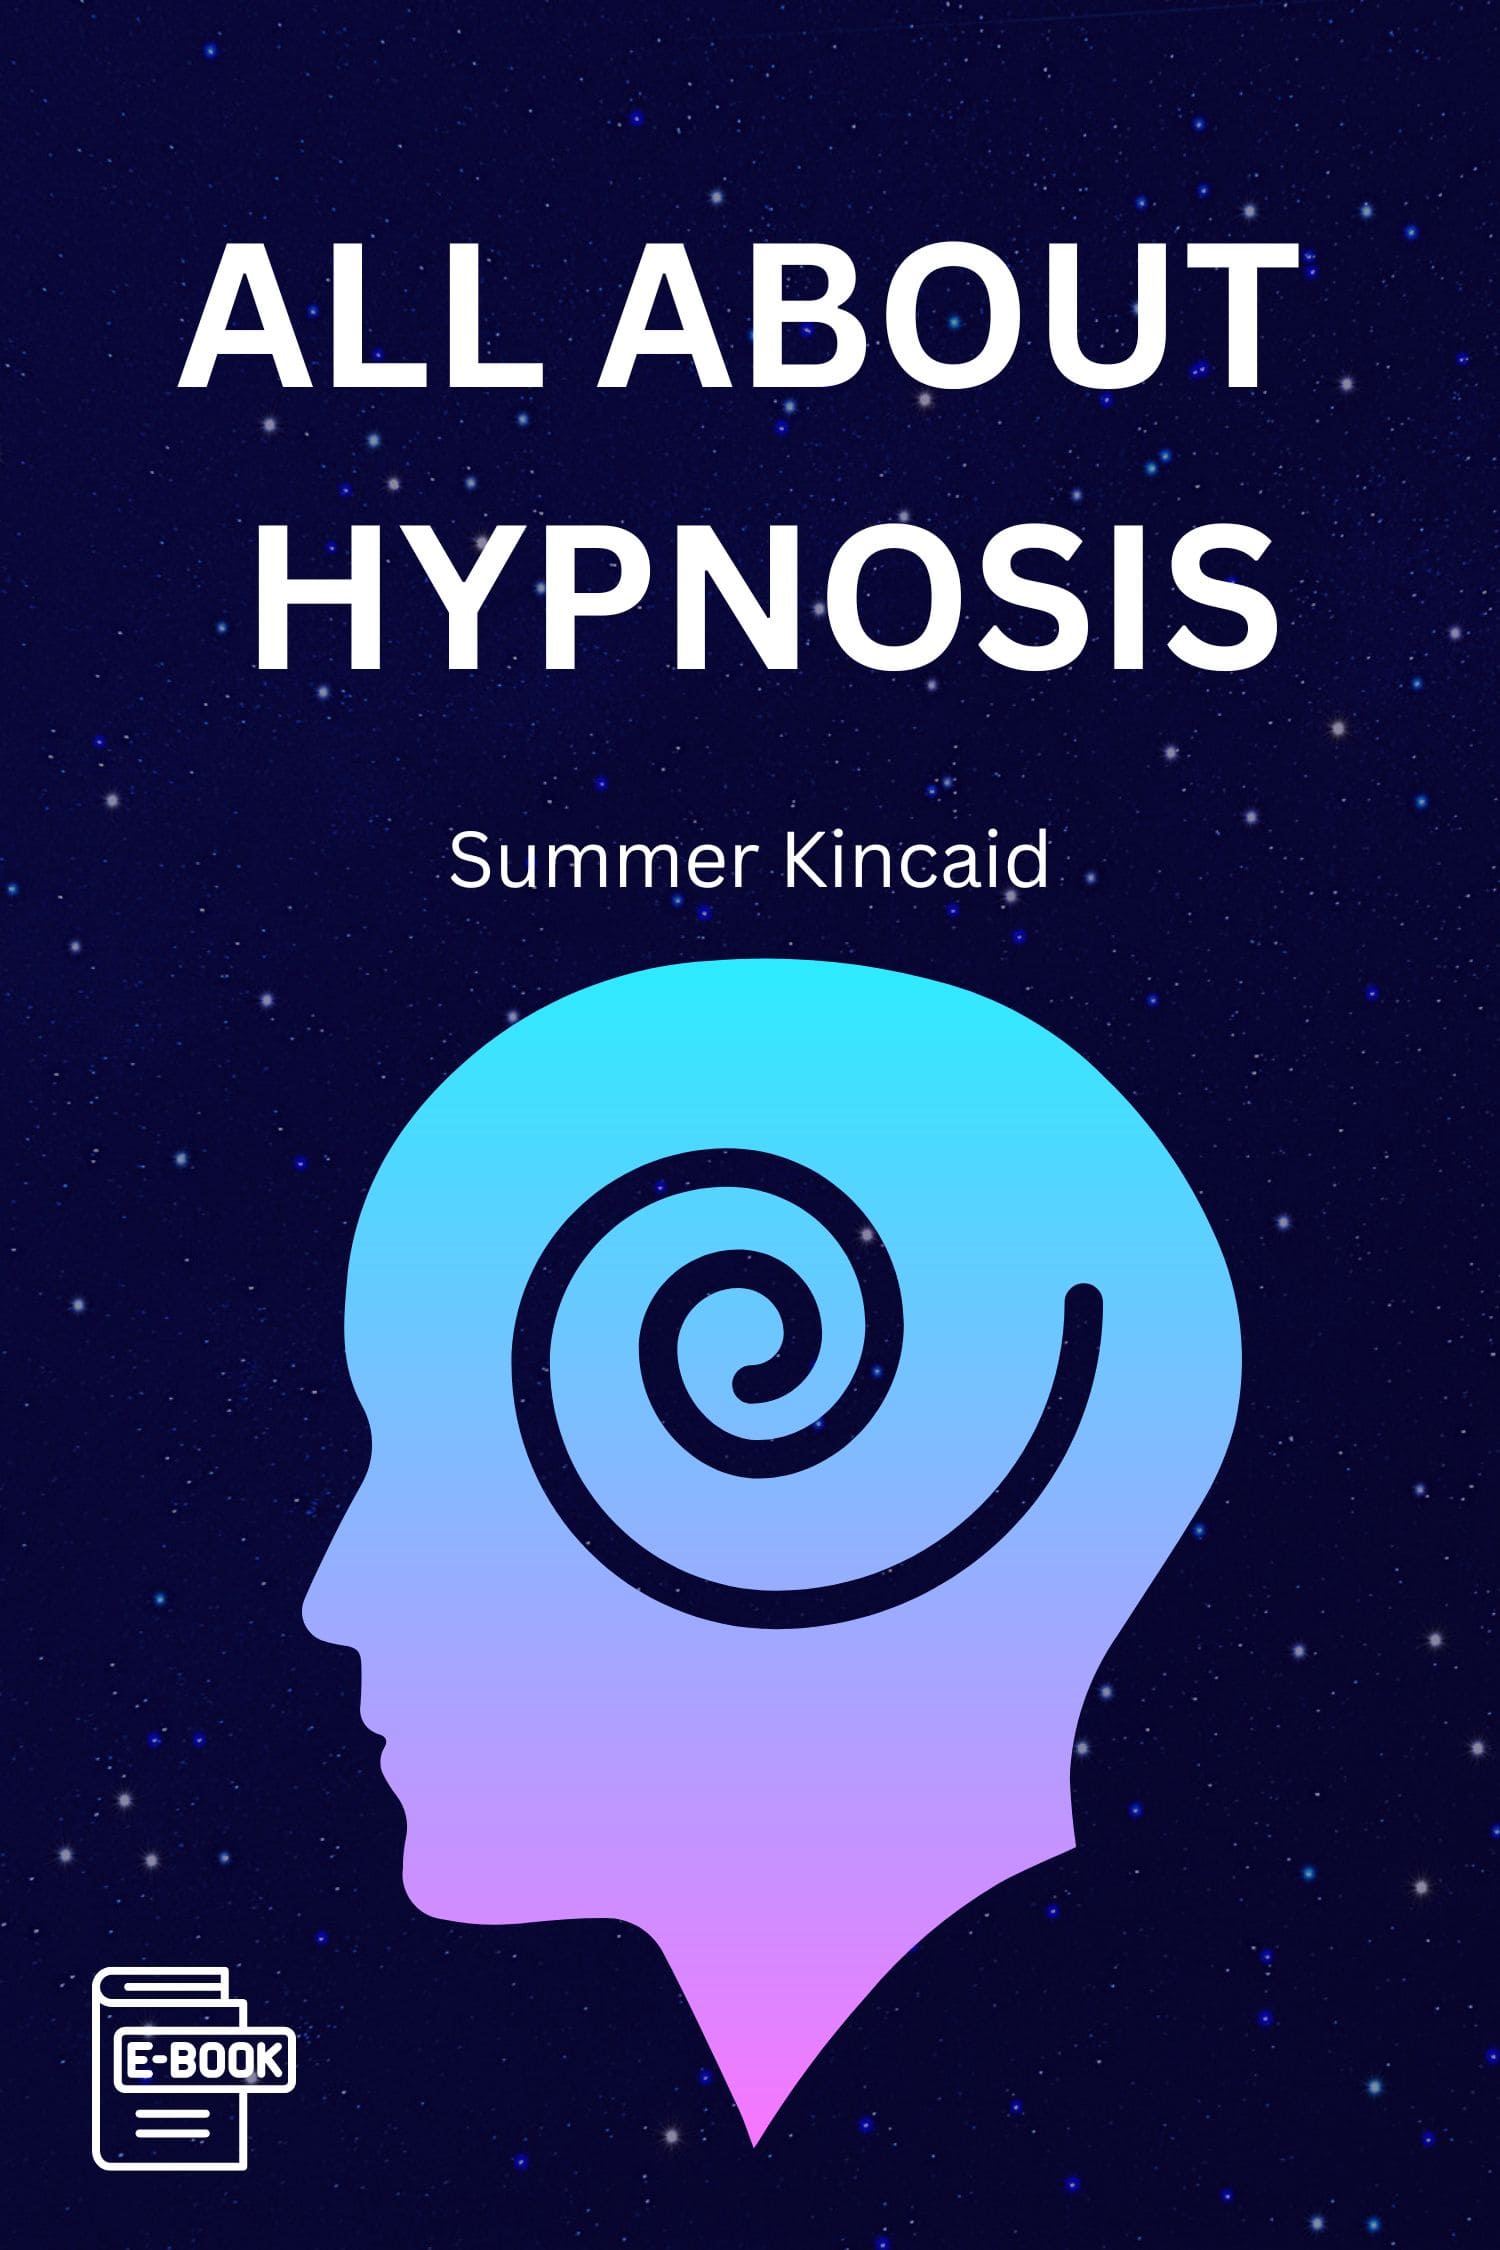 All About Hypnosis ebook